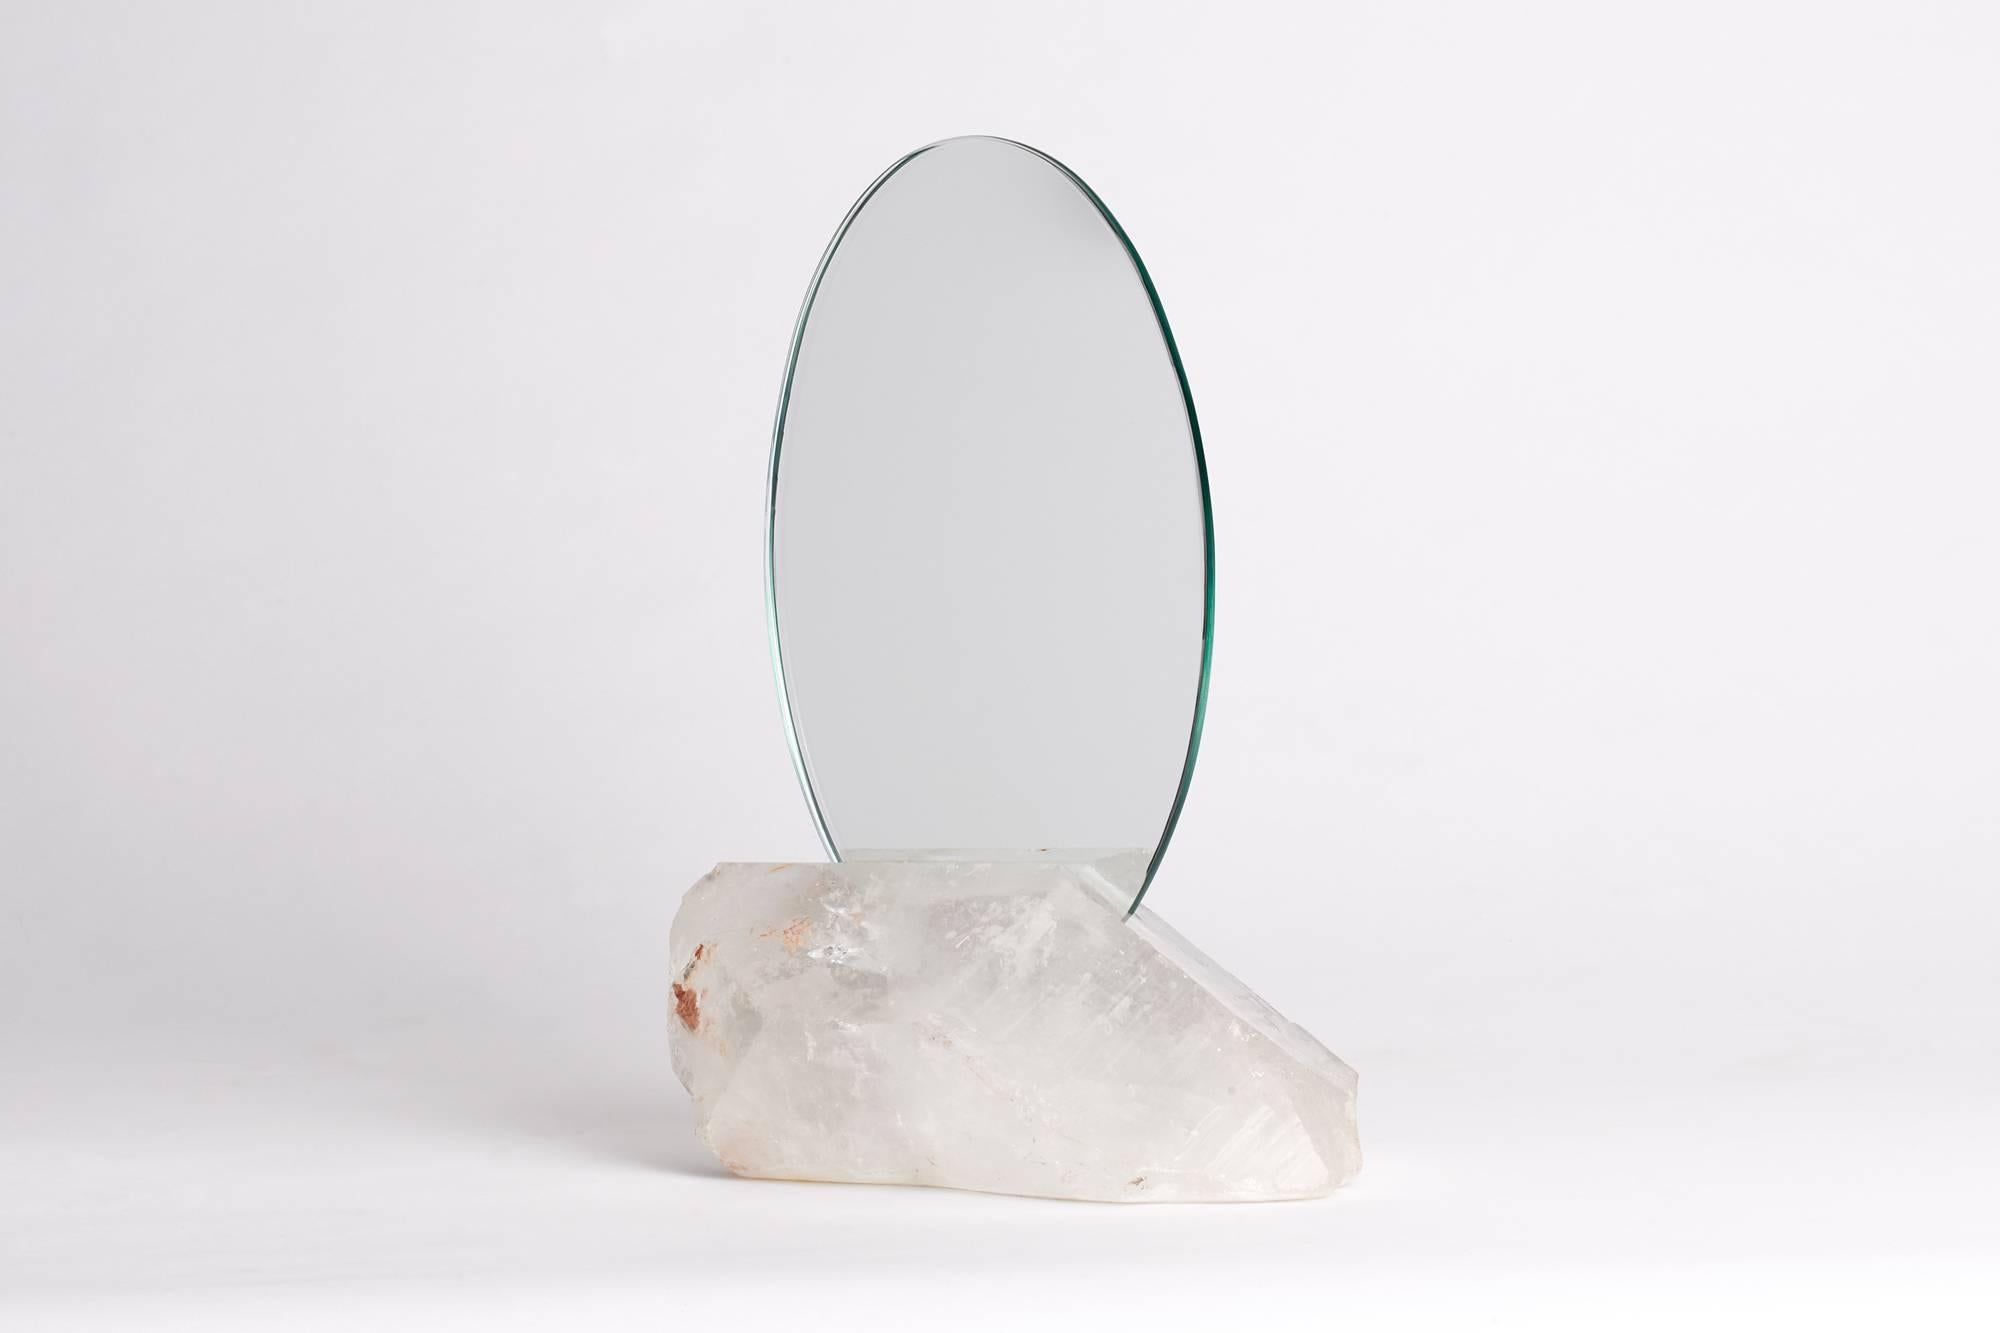 The Aura mirrors are crafted using semi-precious stones, pierced by monolithic mirrors projecting an air of being both ethereal and brooding. The crystals and stones are believed to have different metaphysical properties, while the mirrors